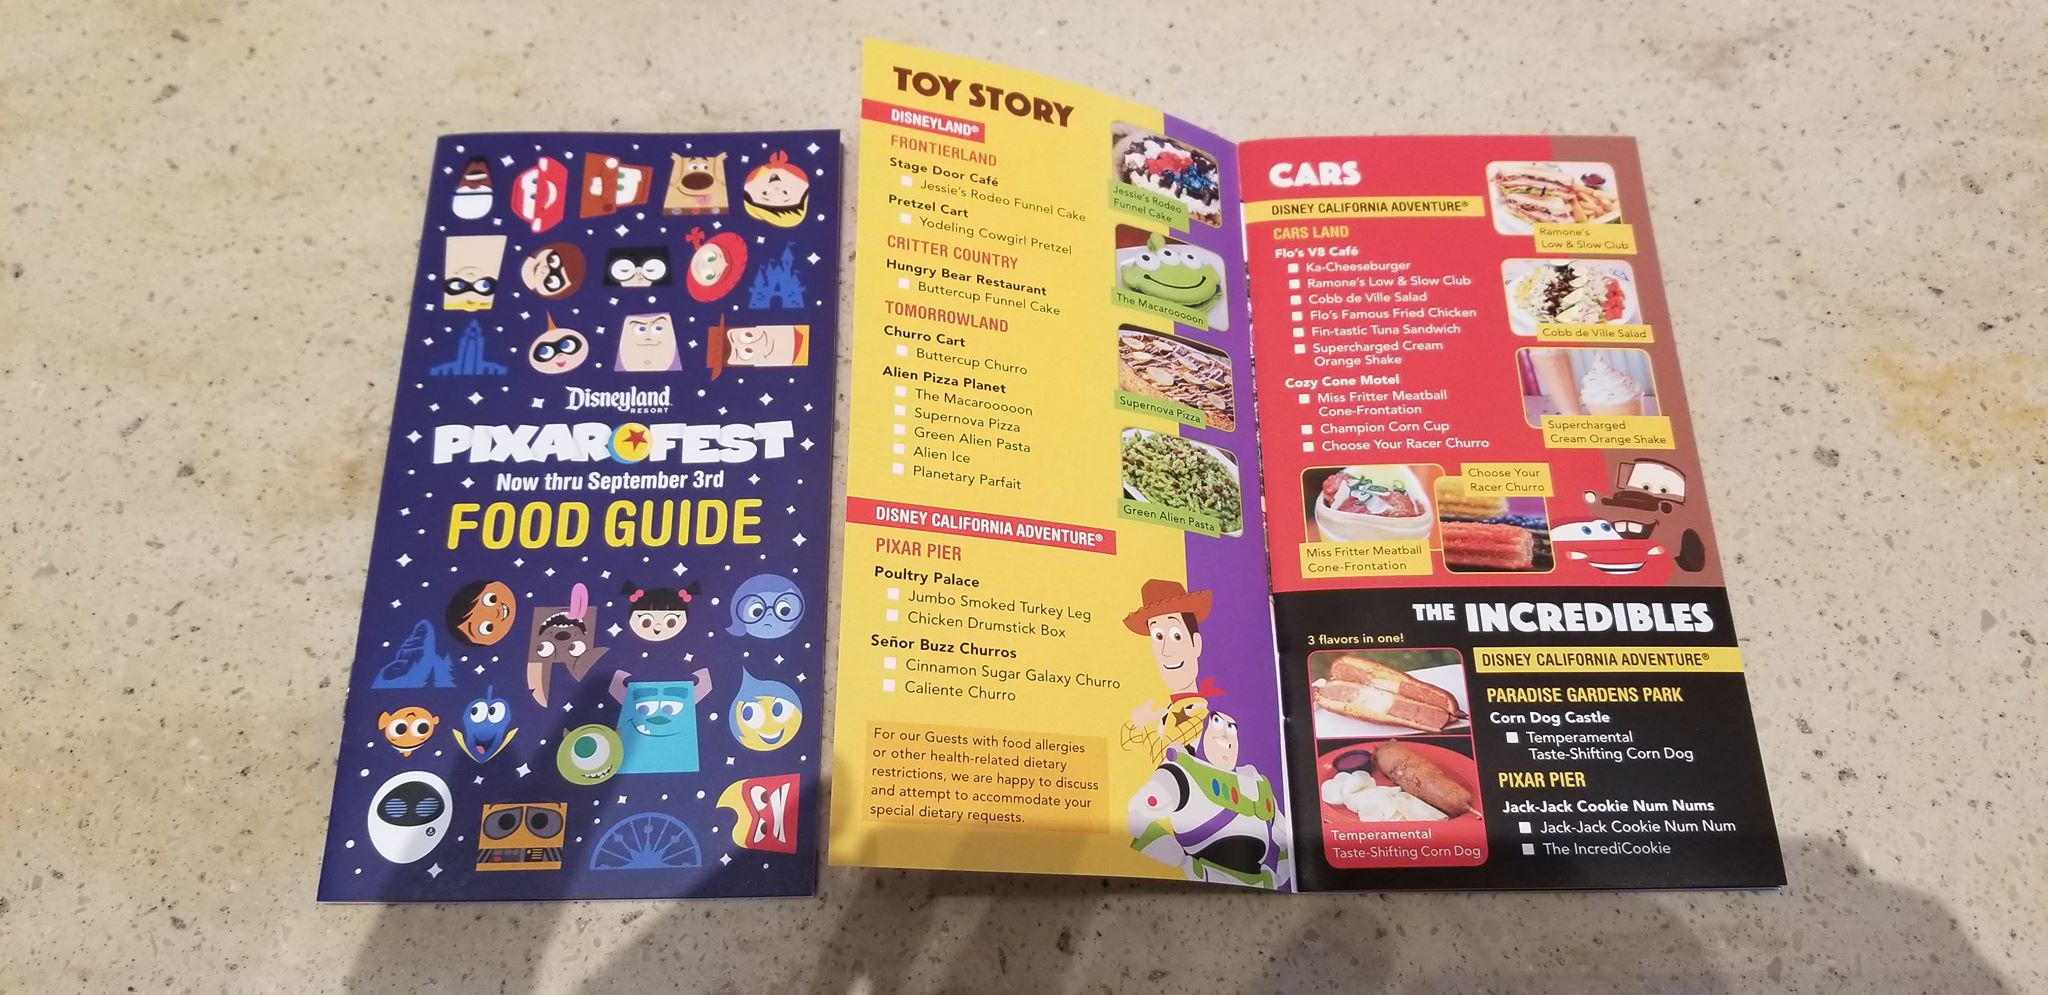 Pixar Fest Food Guide Chip and Company